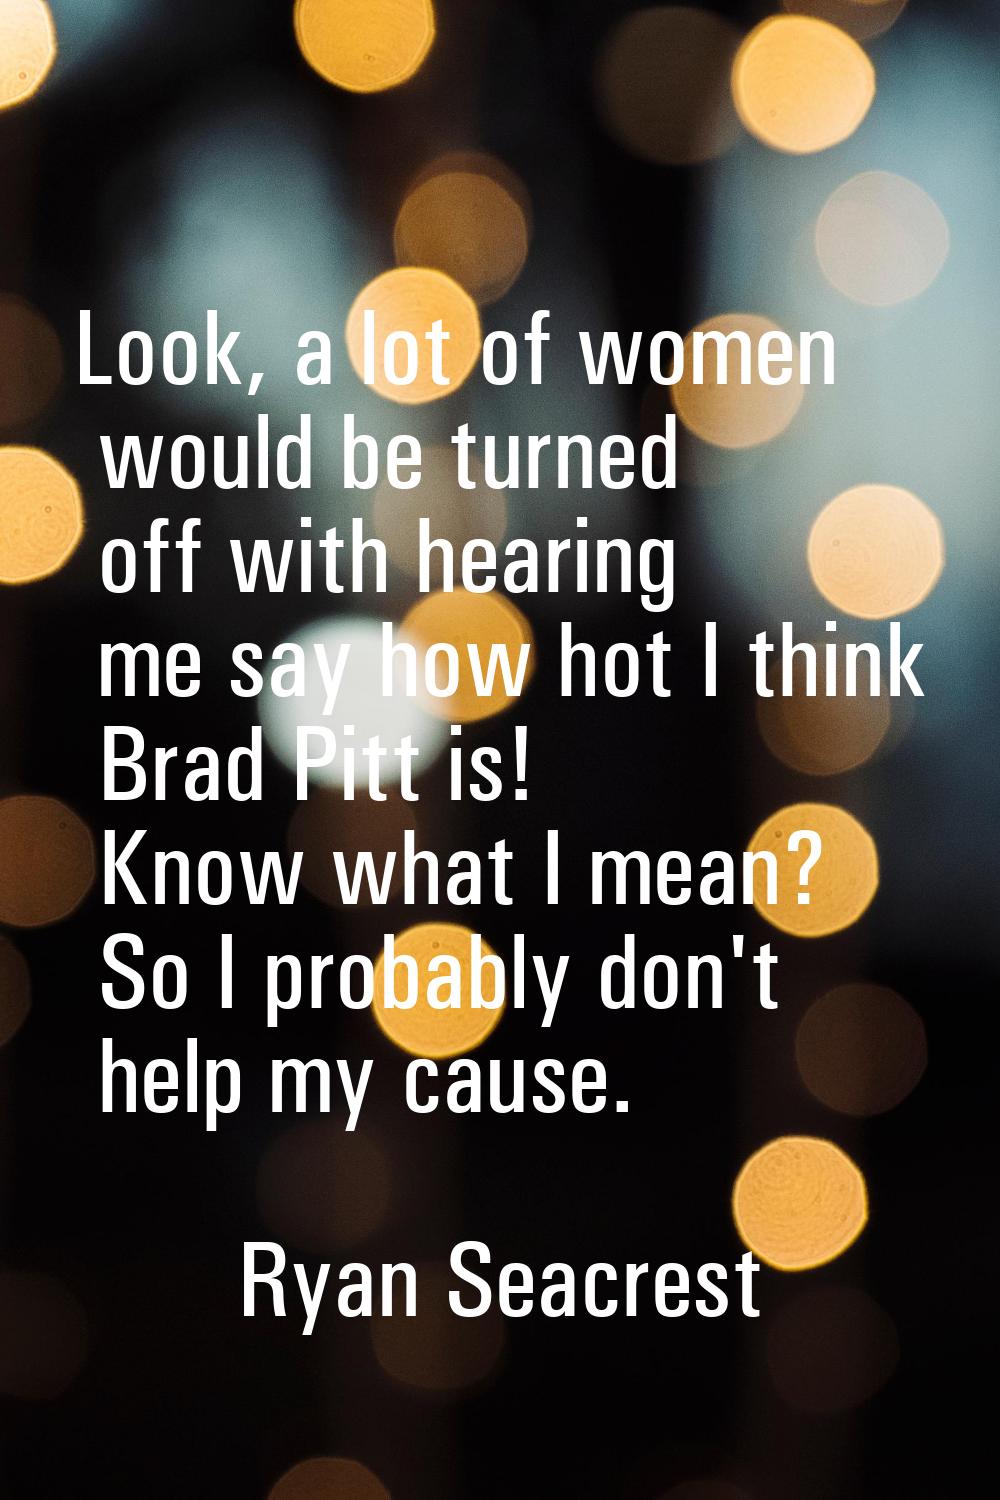 Look, a lot of women would be turned off with hearing me say how hot I think Brad Pitt is! Know wha